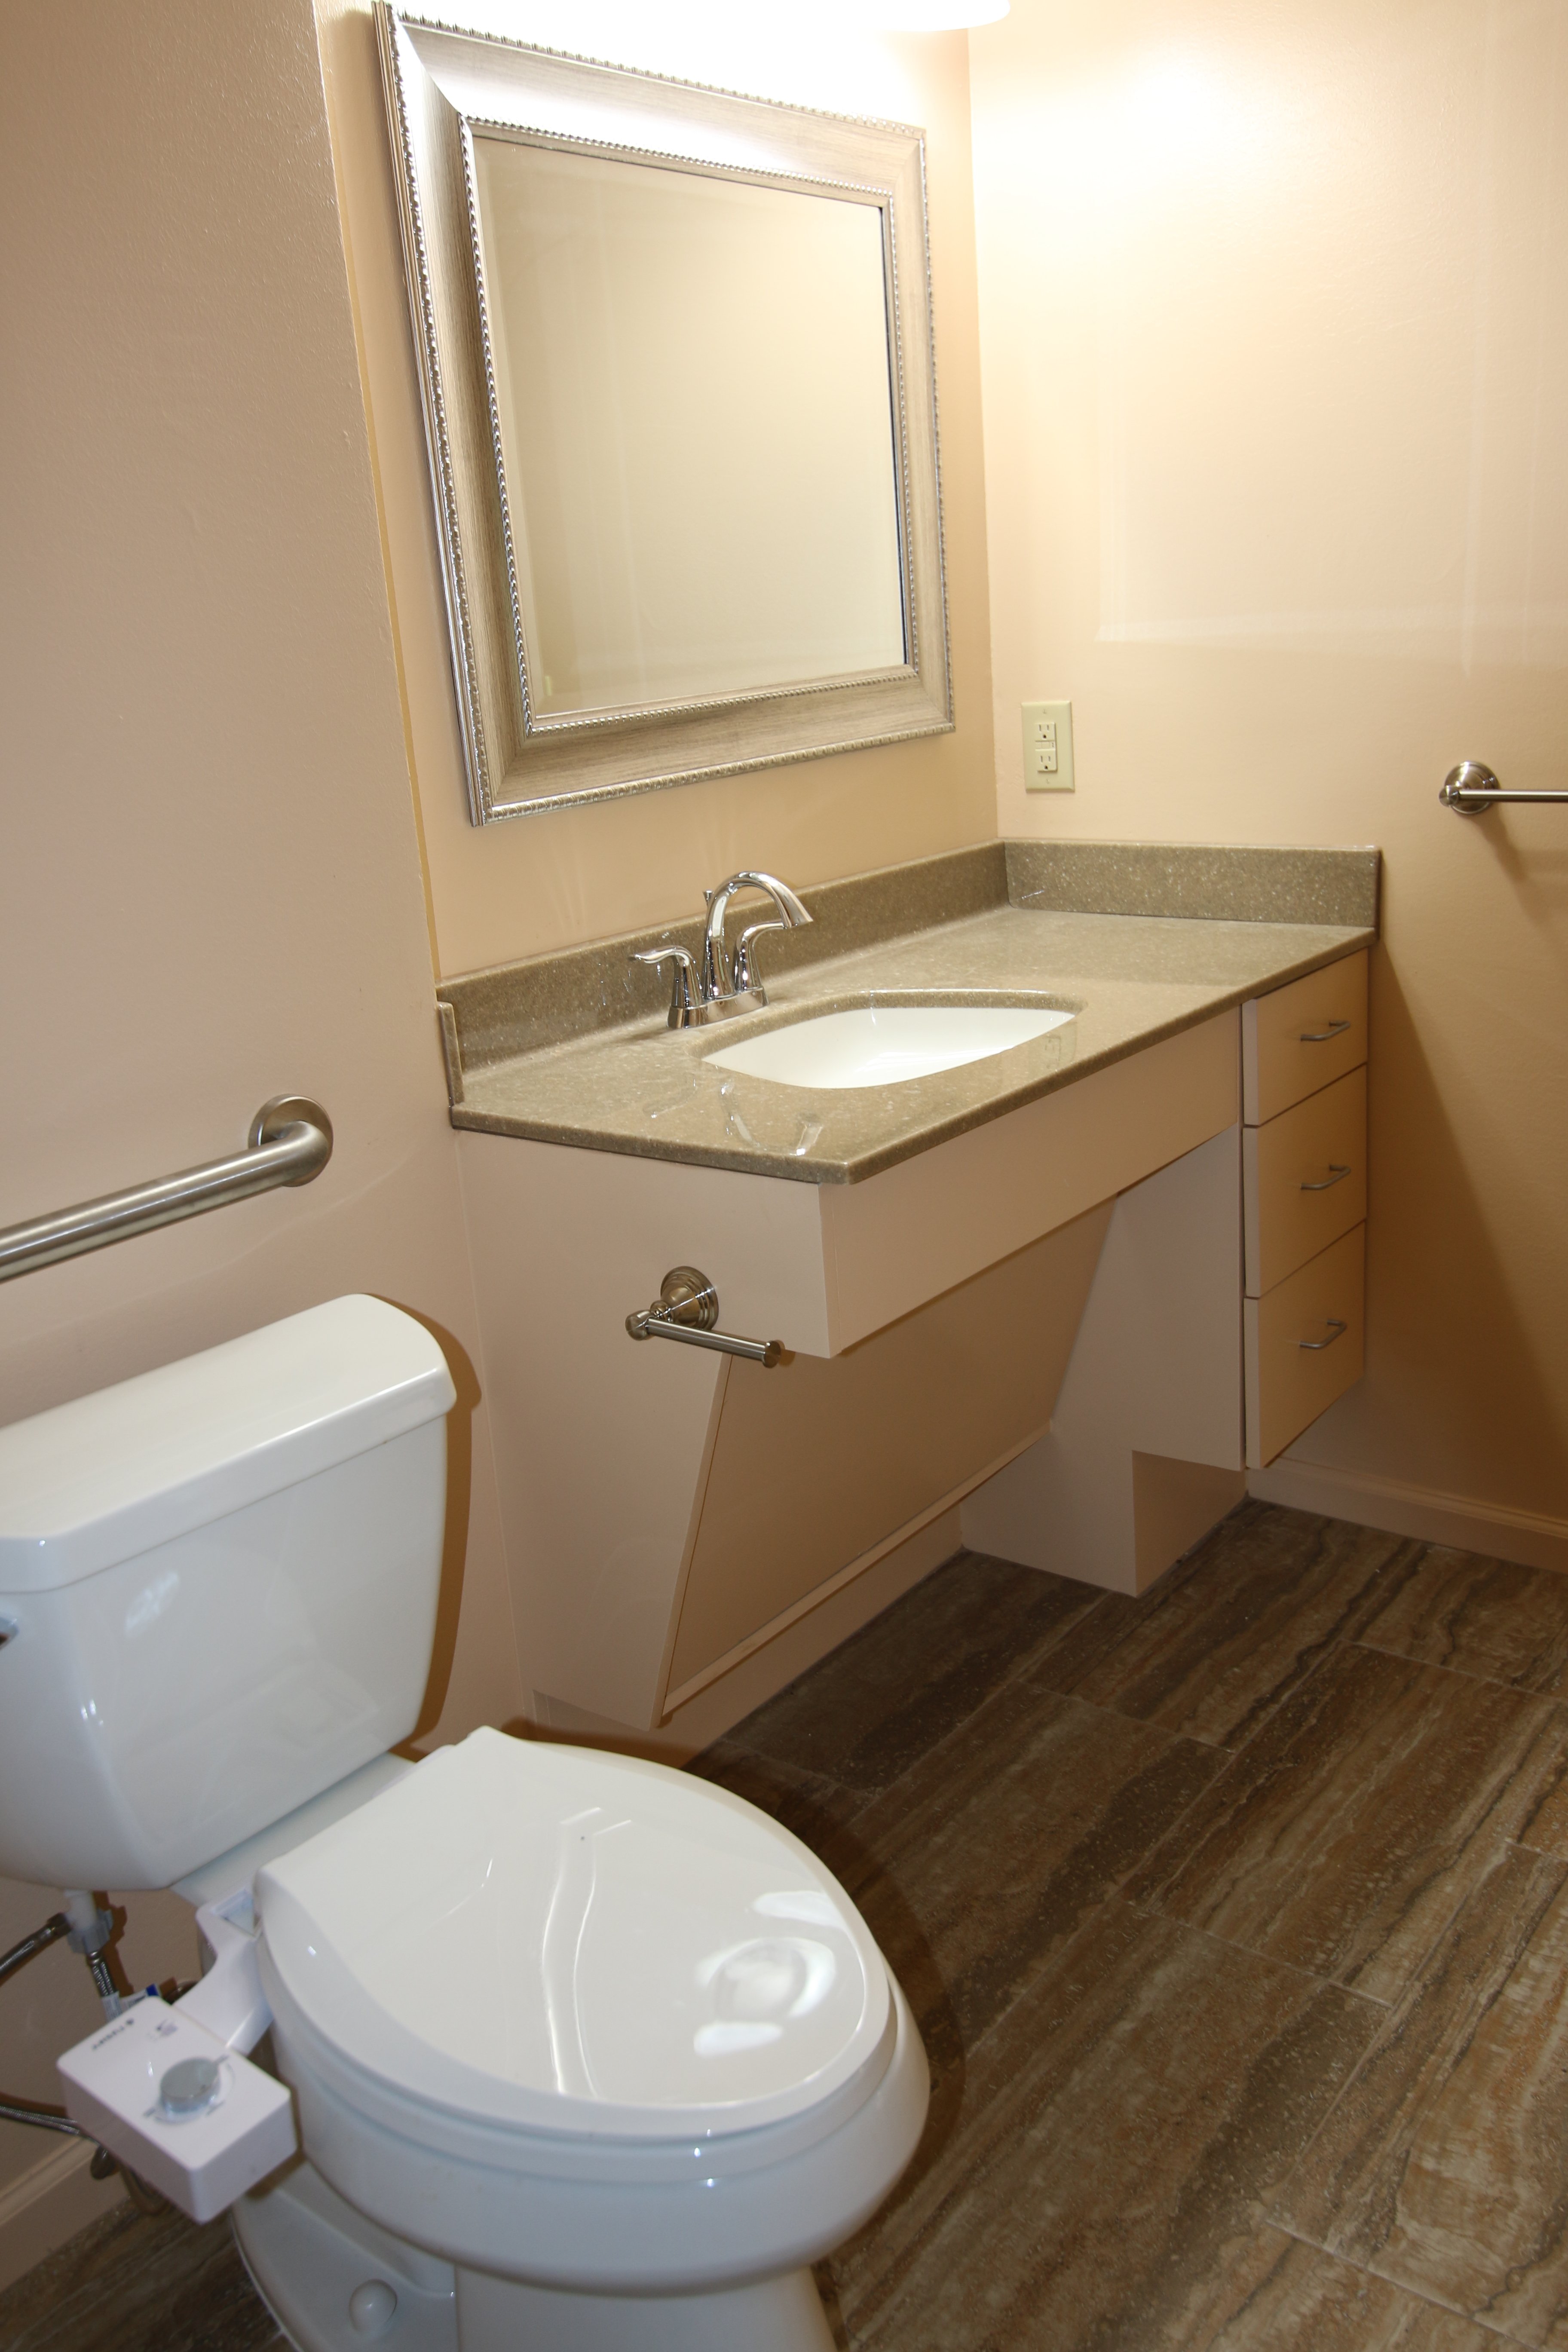 What Is The Height Of A Handicap Vanity, Ada Compliant Vanity Dimensions